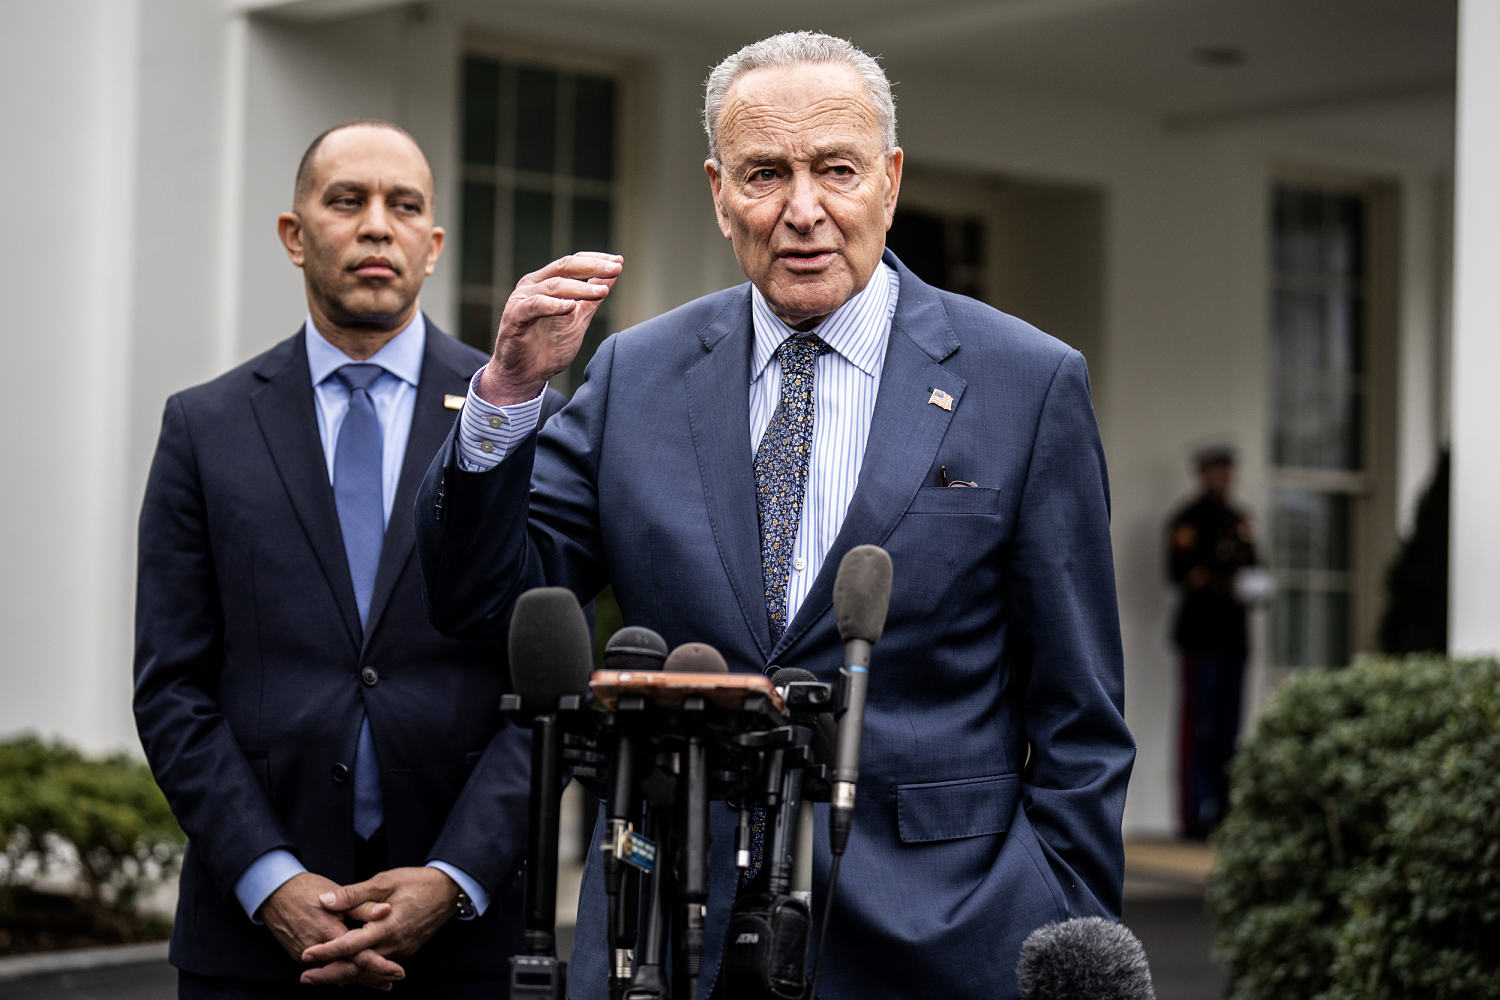 Democratic leaders Chuck Schumer and Hakeem Jeffries endorse Harris for president